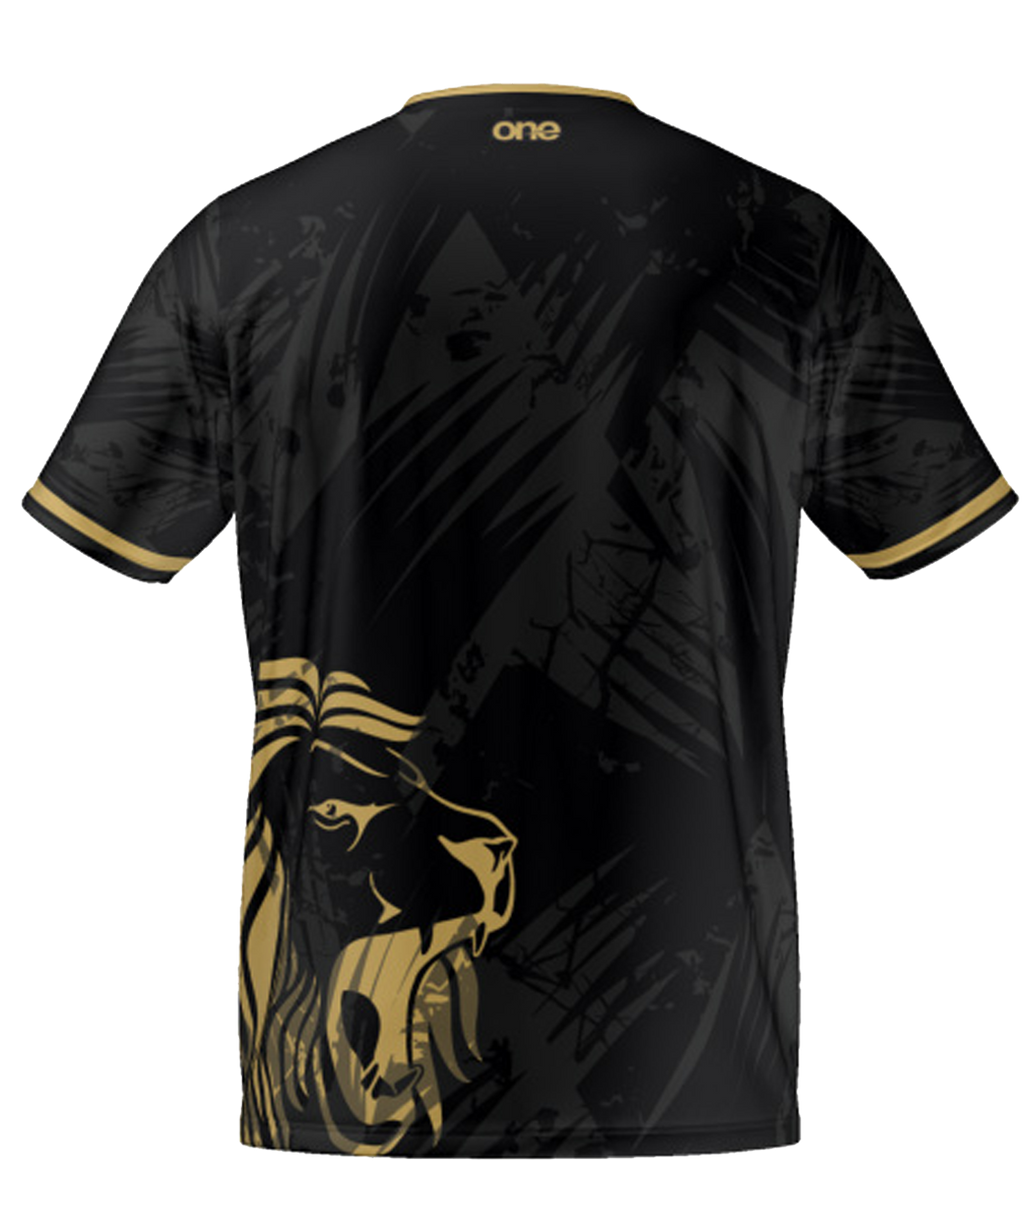 Limited Edition Cameroon Lifestyle Jersey